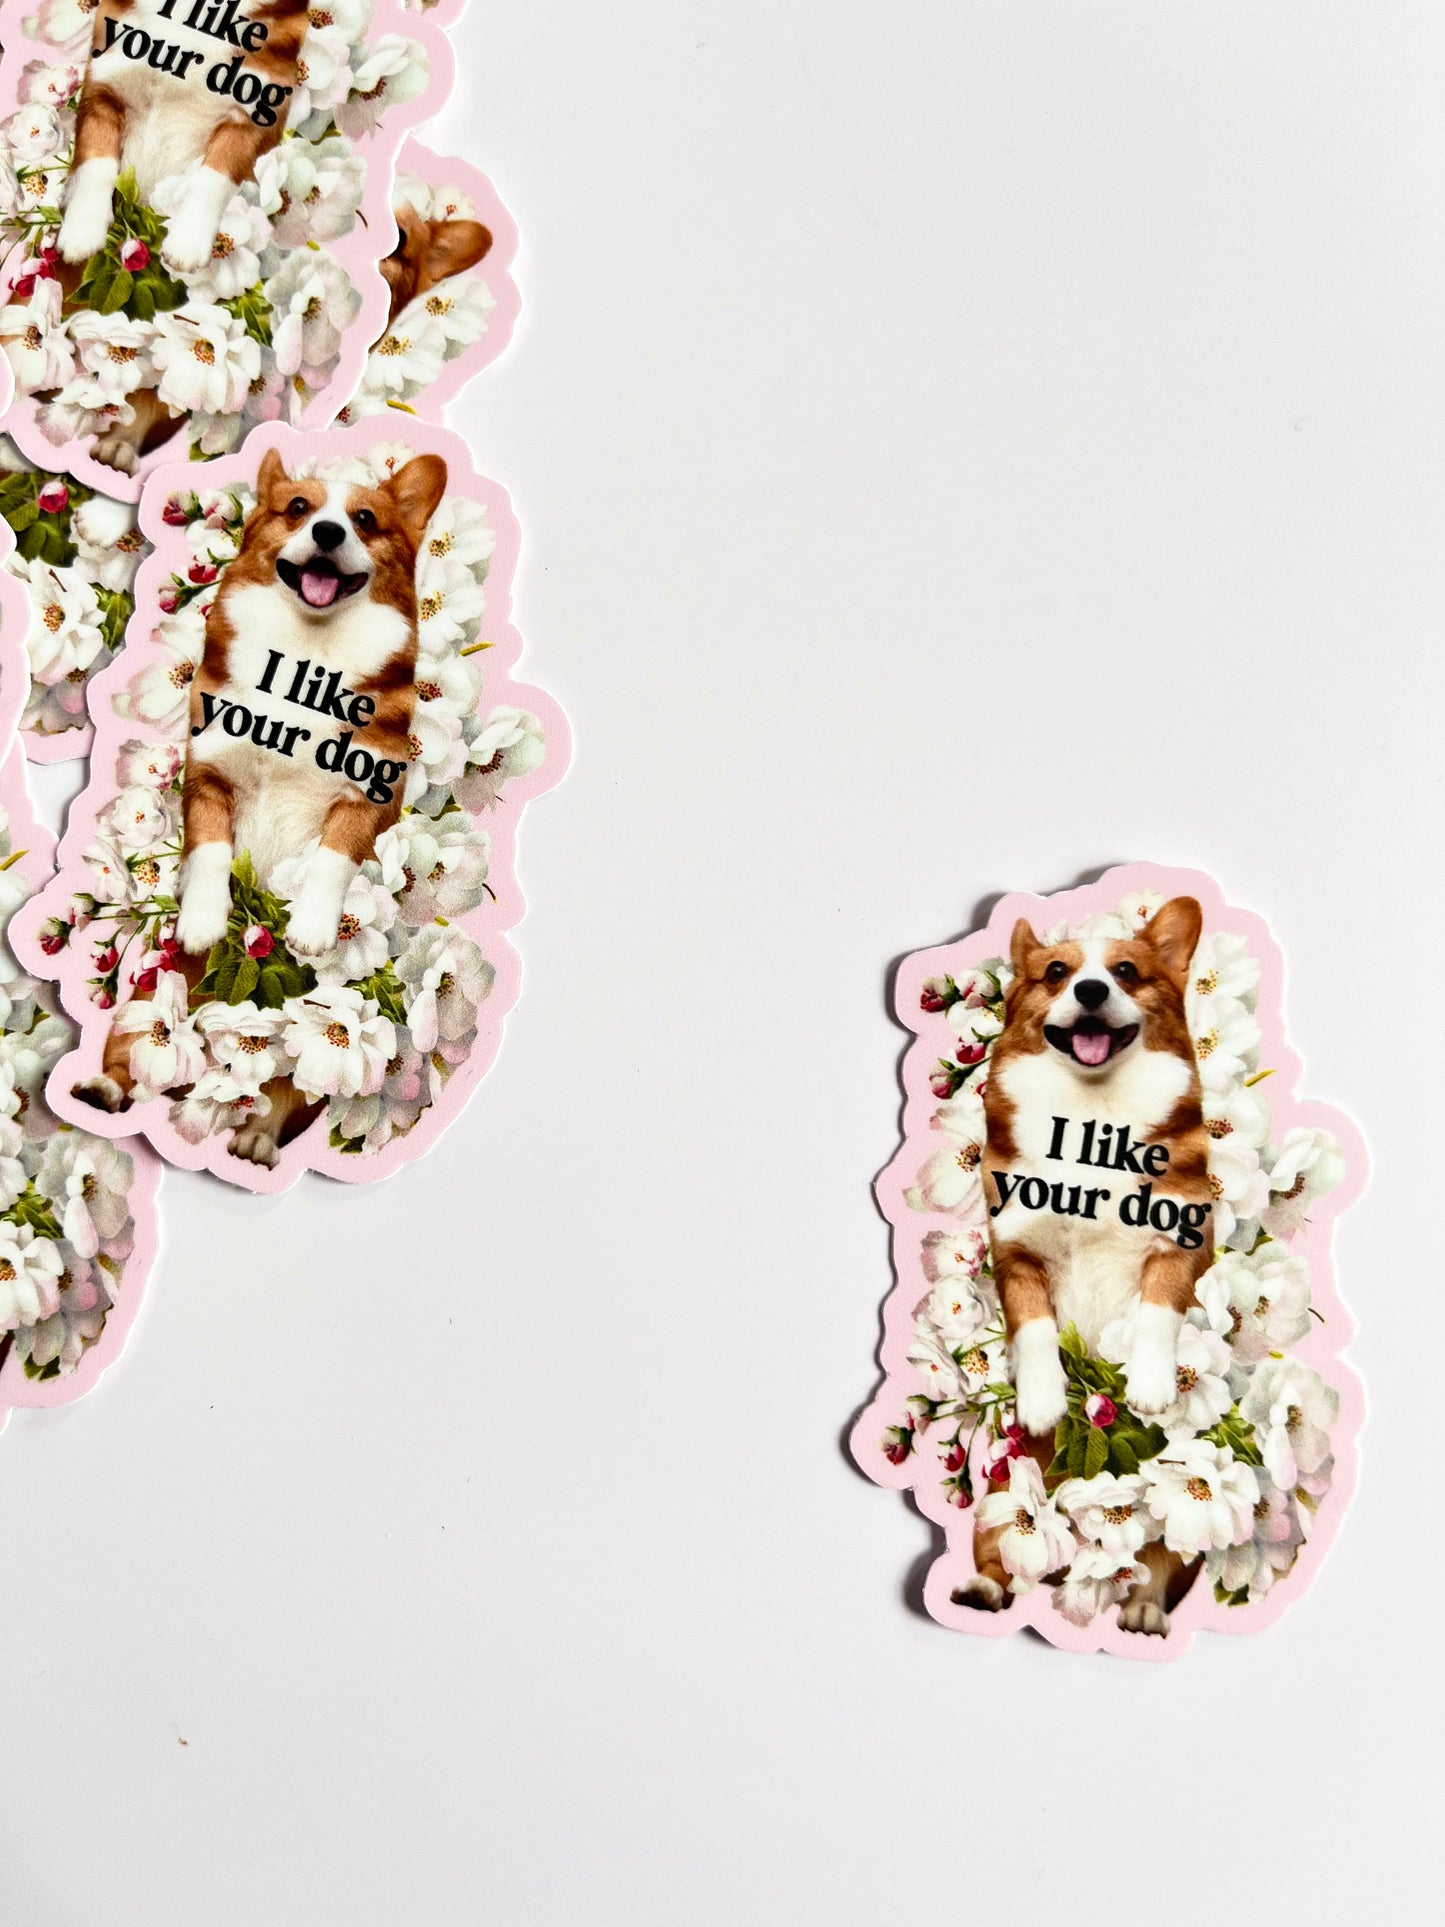 adorable puppy sticker i like your dog fun corgi stickers pink flowers vintage style stickers for dog lovers funny stickers coin laundry montana 